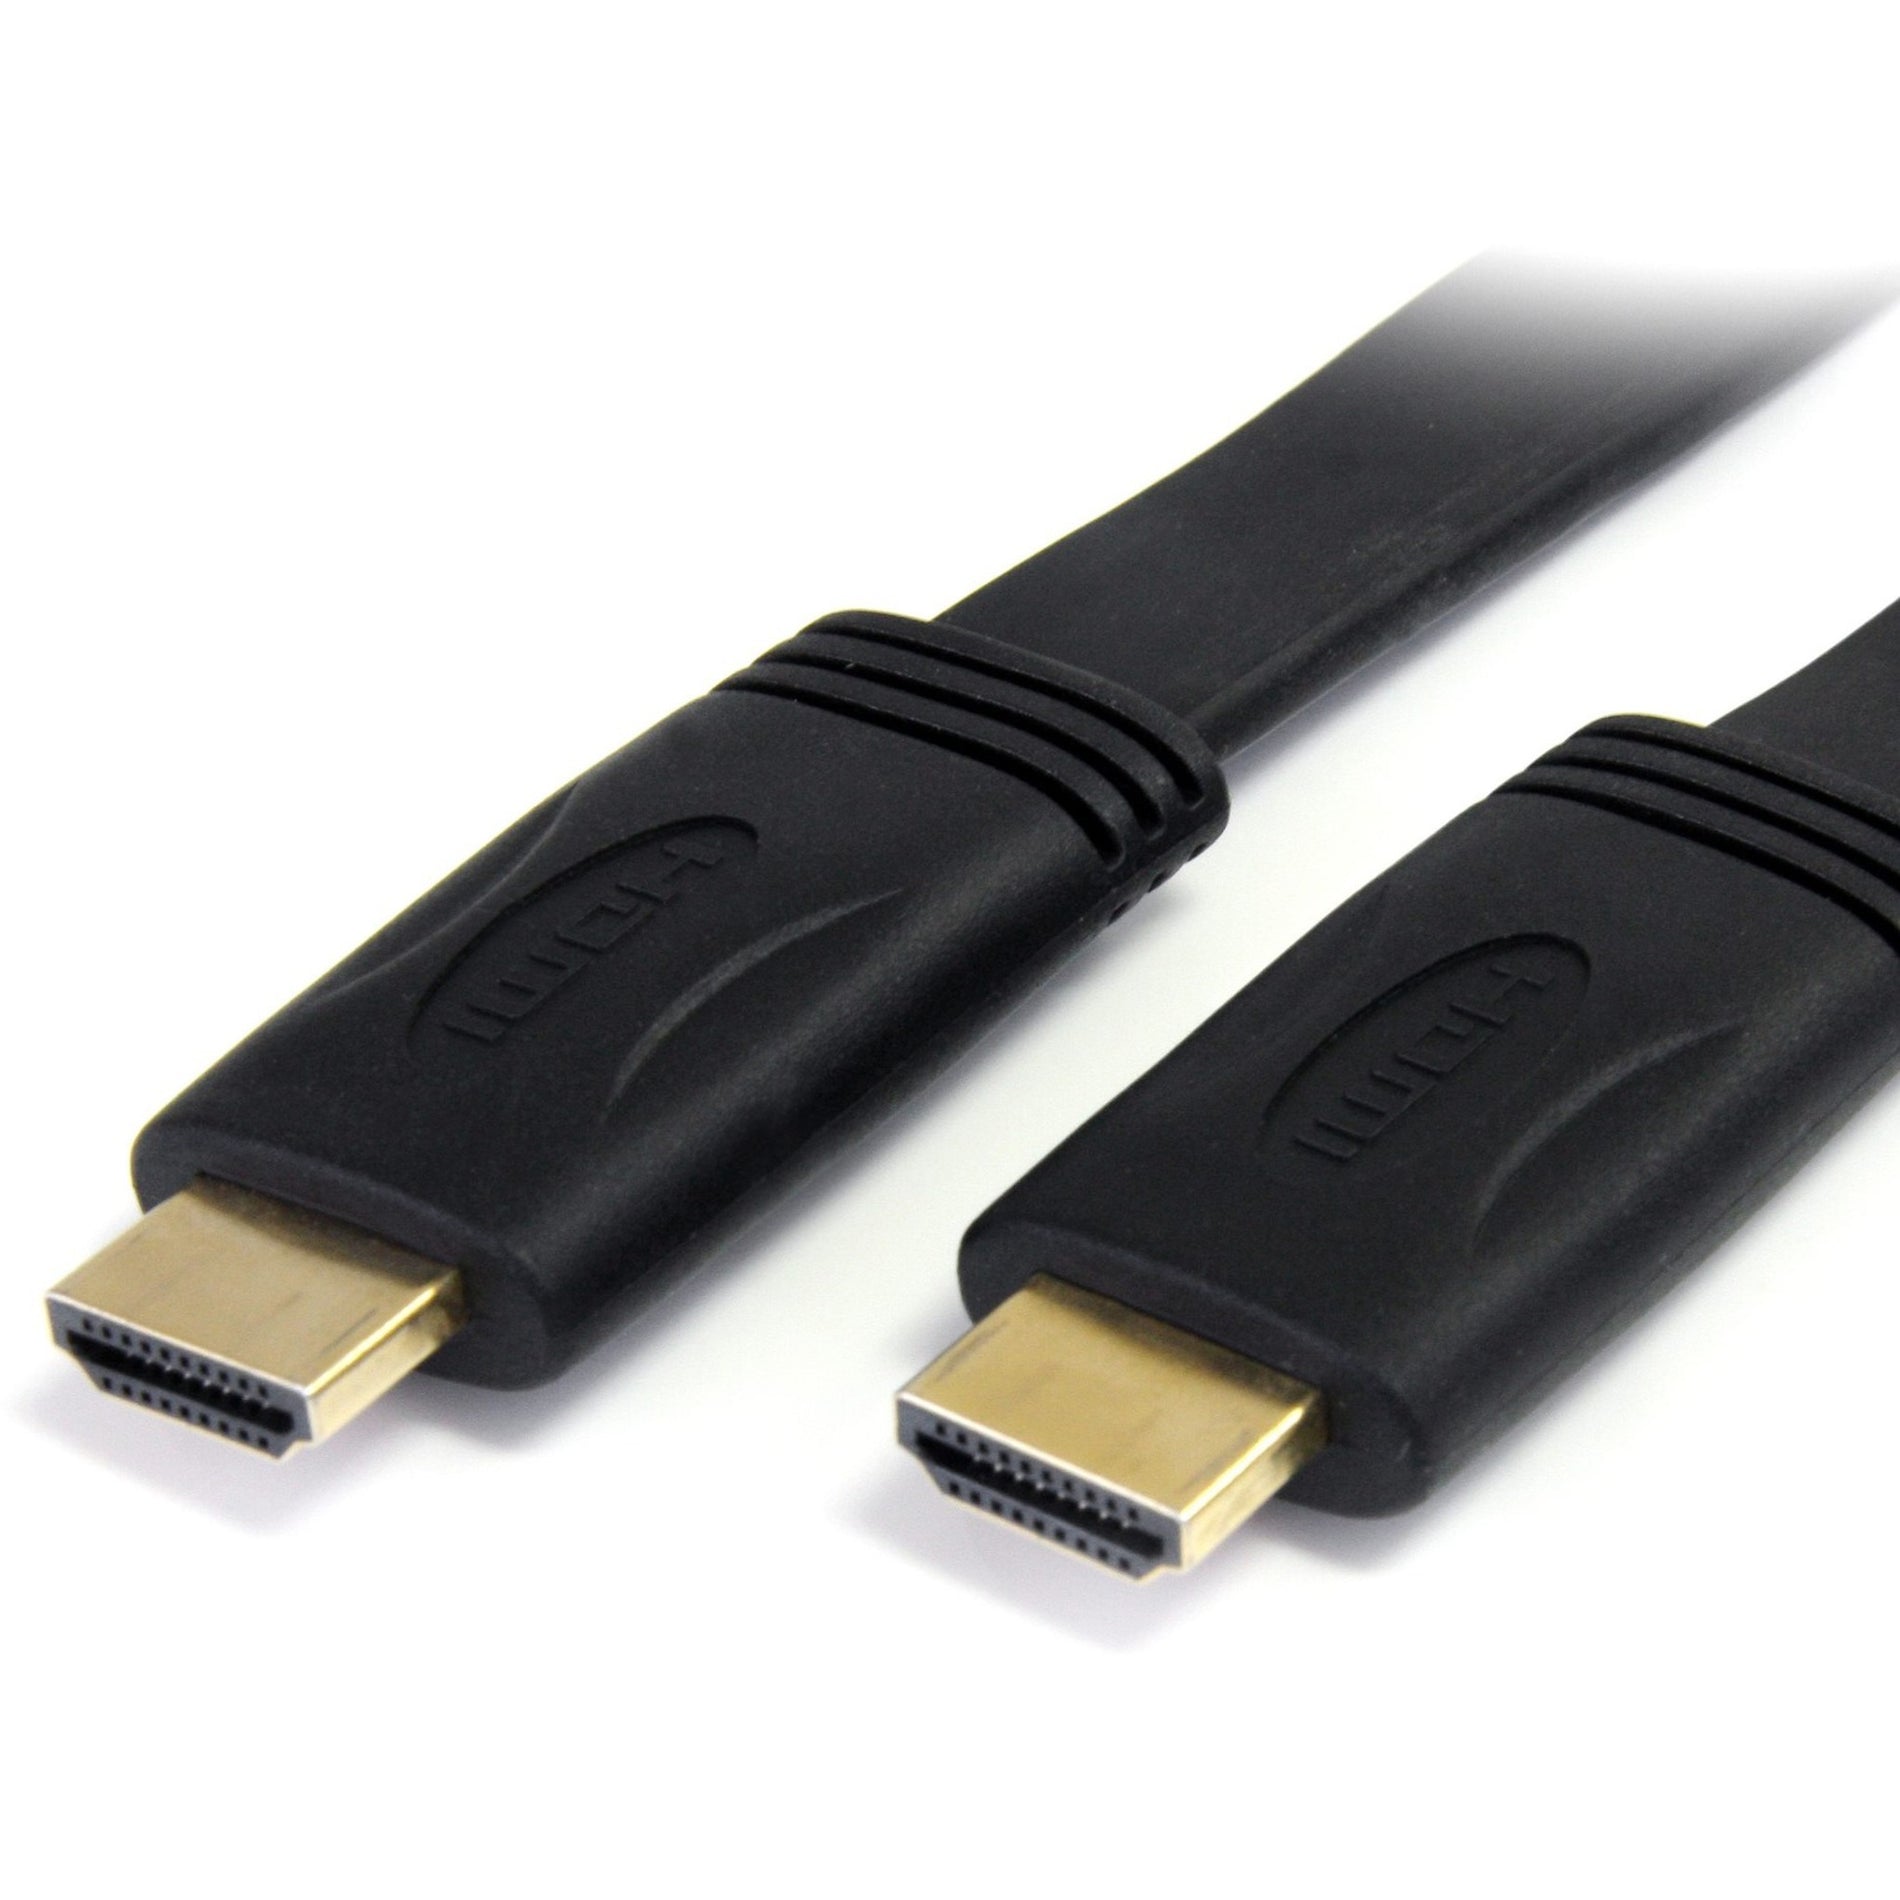 StarTech.com HDMIMM6FL 6 ft High Speed Flat HDMI Digital Video Cable with Ethernet, Gold-Plated Connectors, 4K Resolution Support